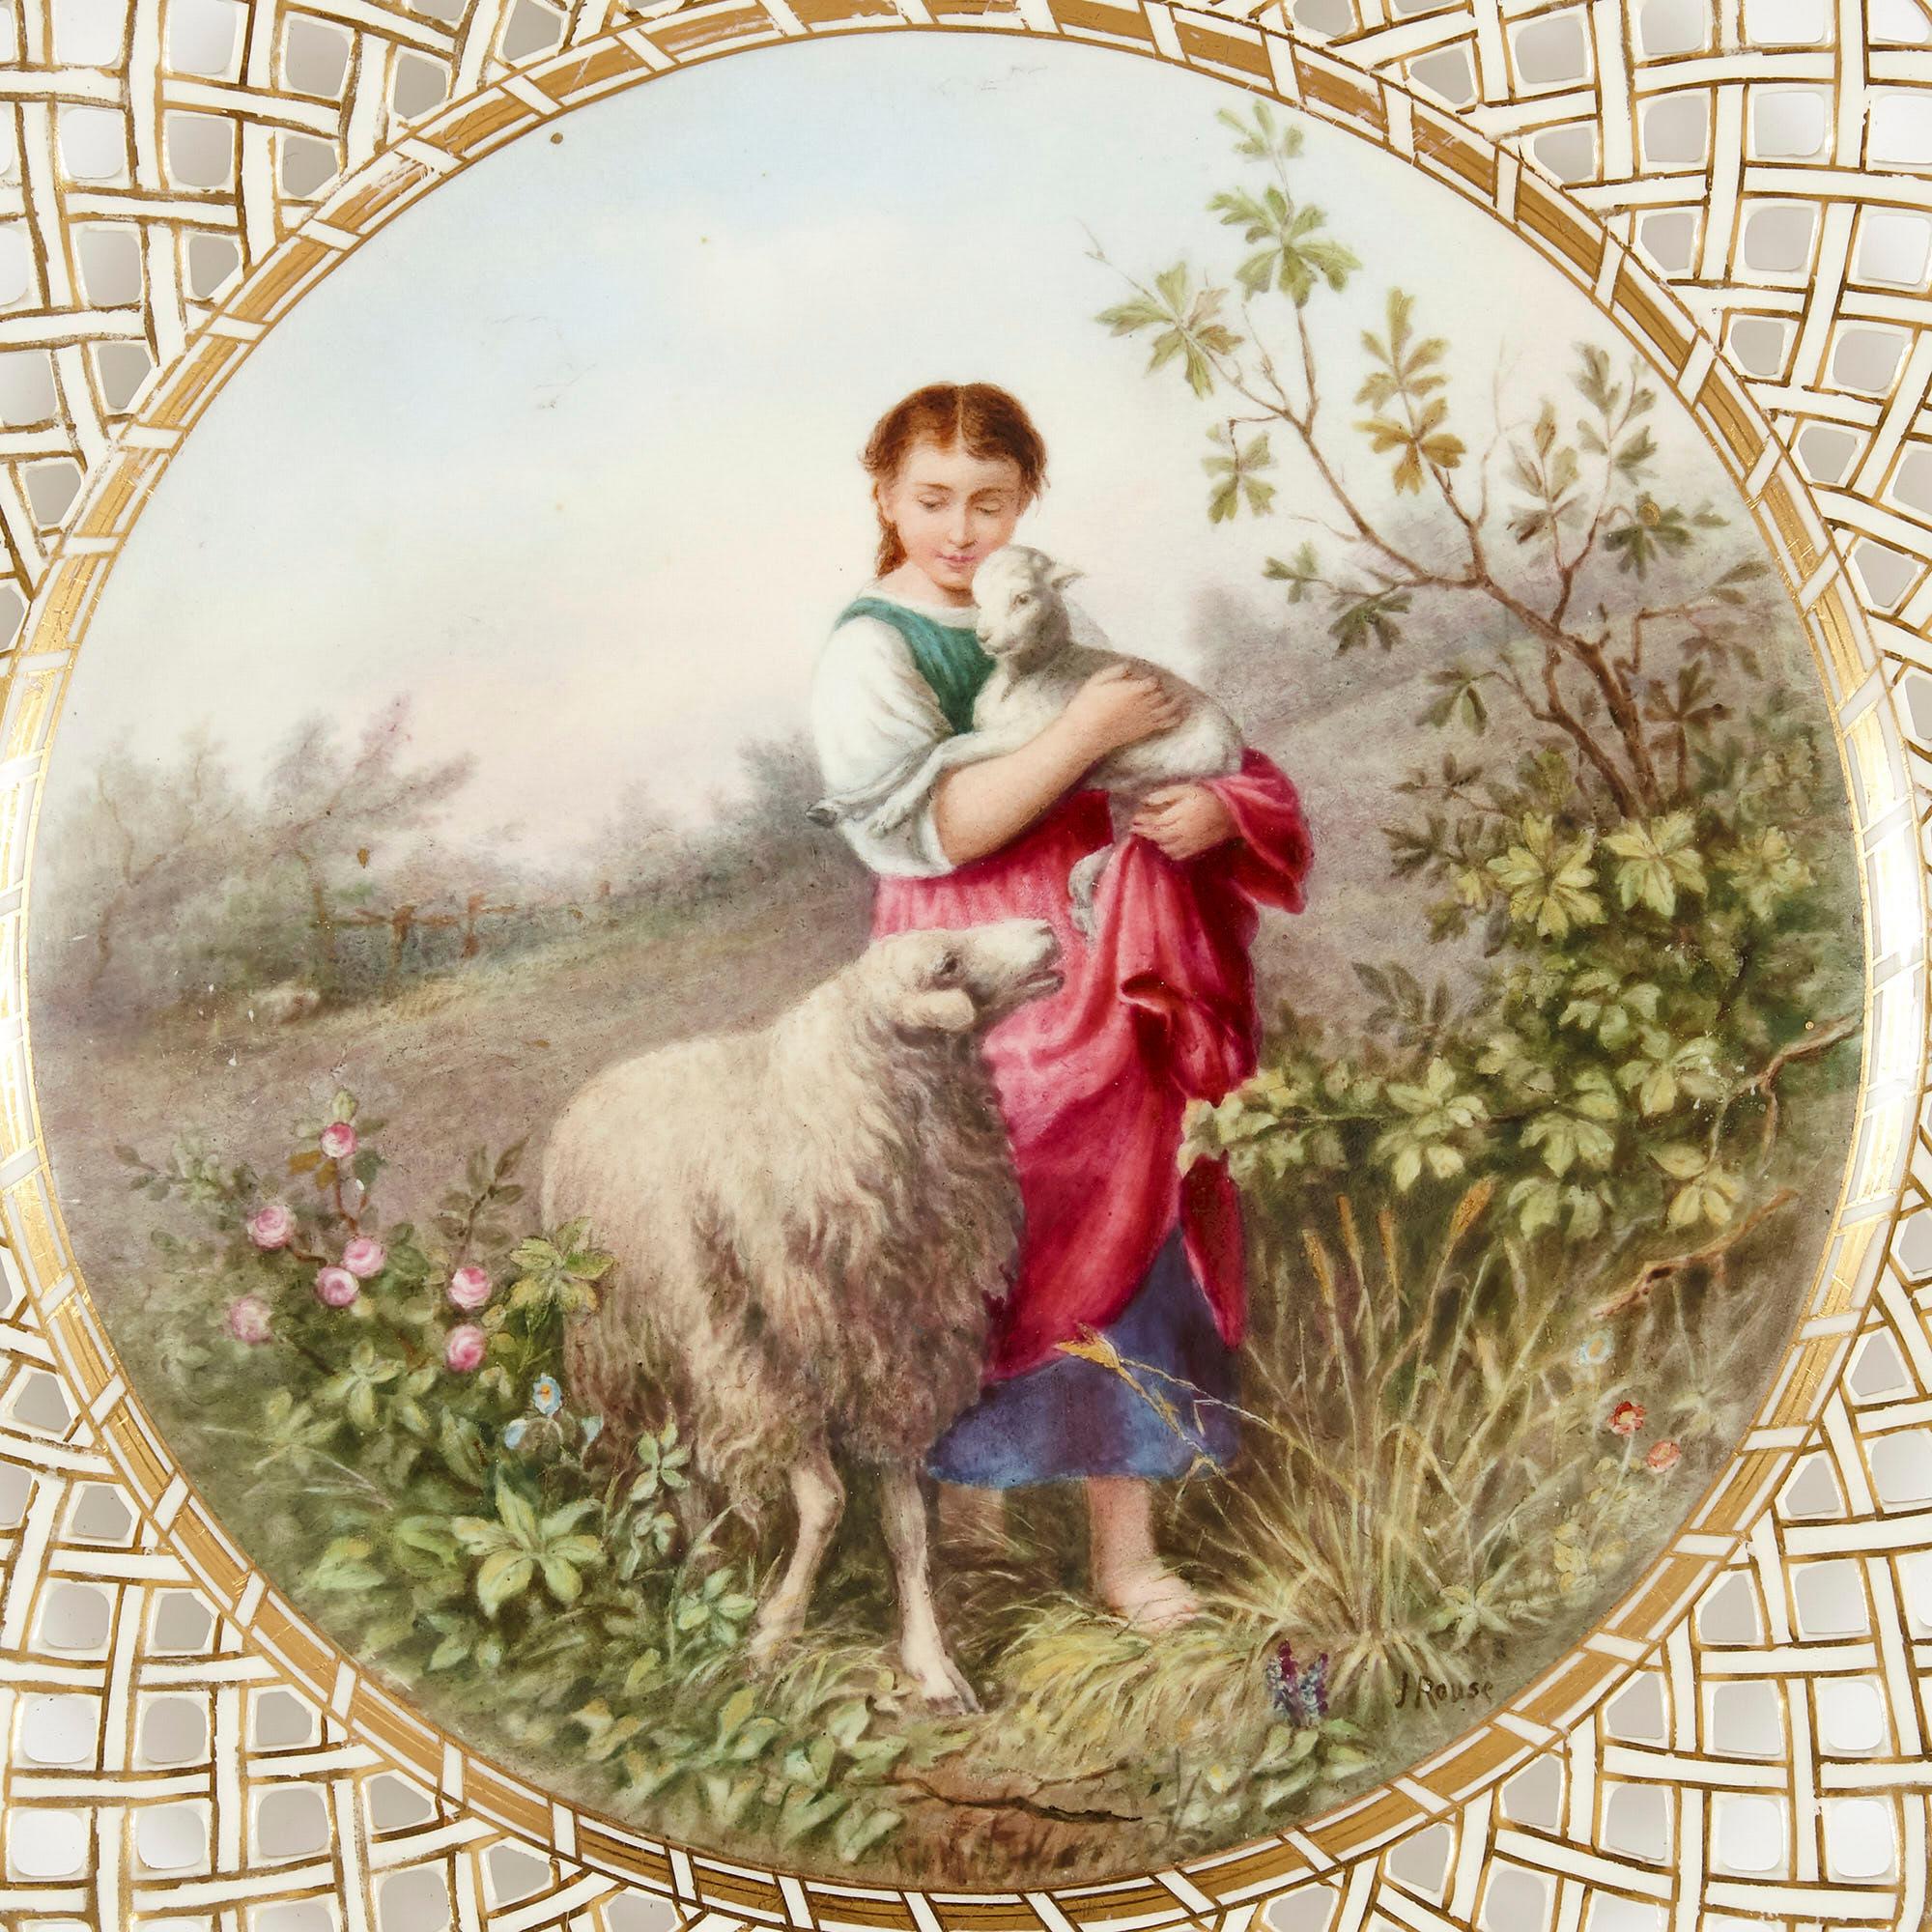 'The Shepherd's Daughter' painted Derby Porcelain plate by James Rouse
English, early 20th century
Dimensions: Height 2cm, diameter 24.5cm

Of circular form, this fine Derby porcelain cabinet plate features a gilt and latticework pierced rim,